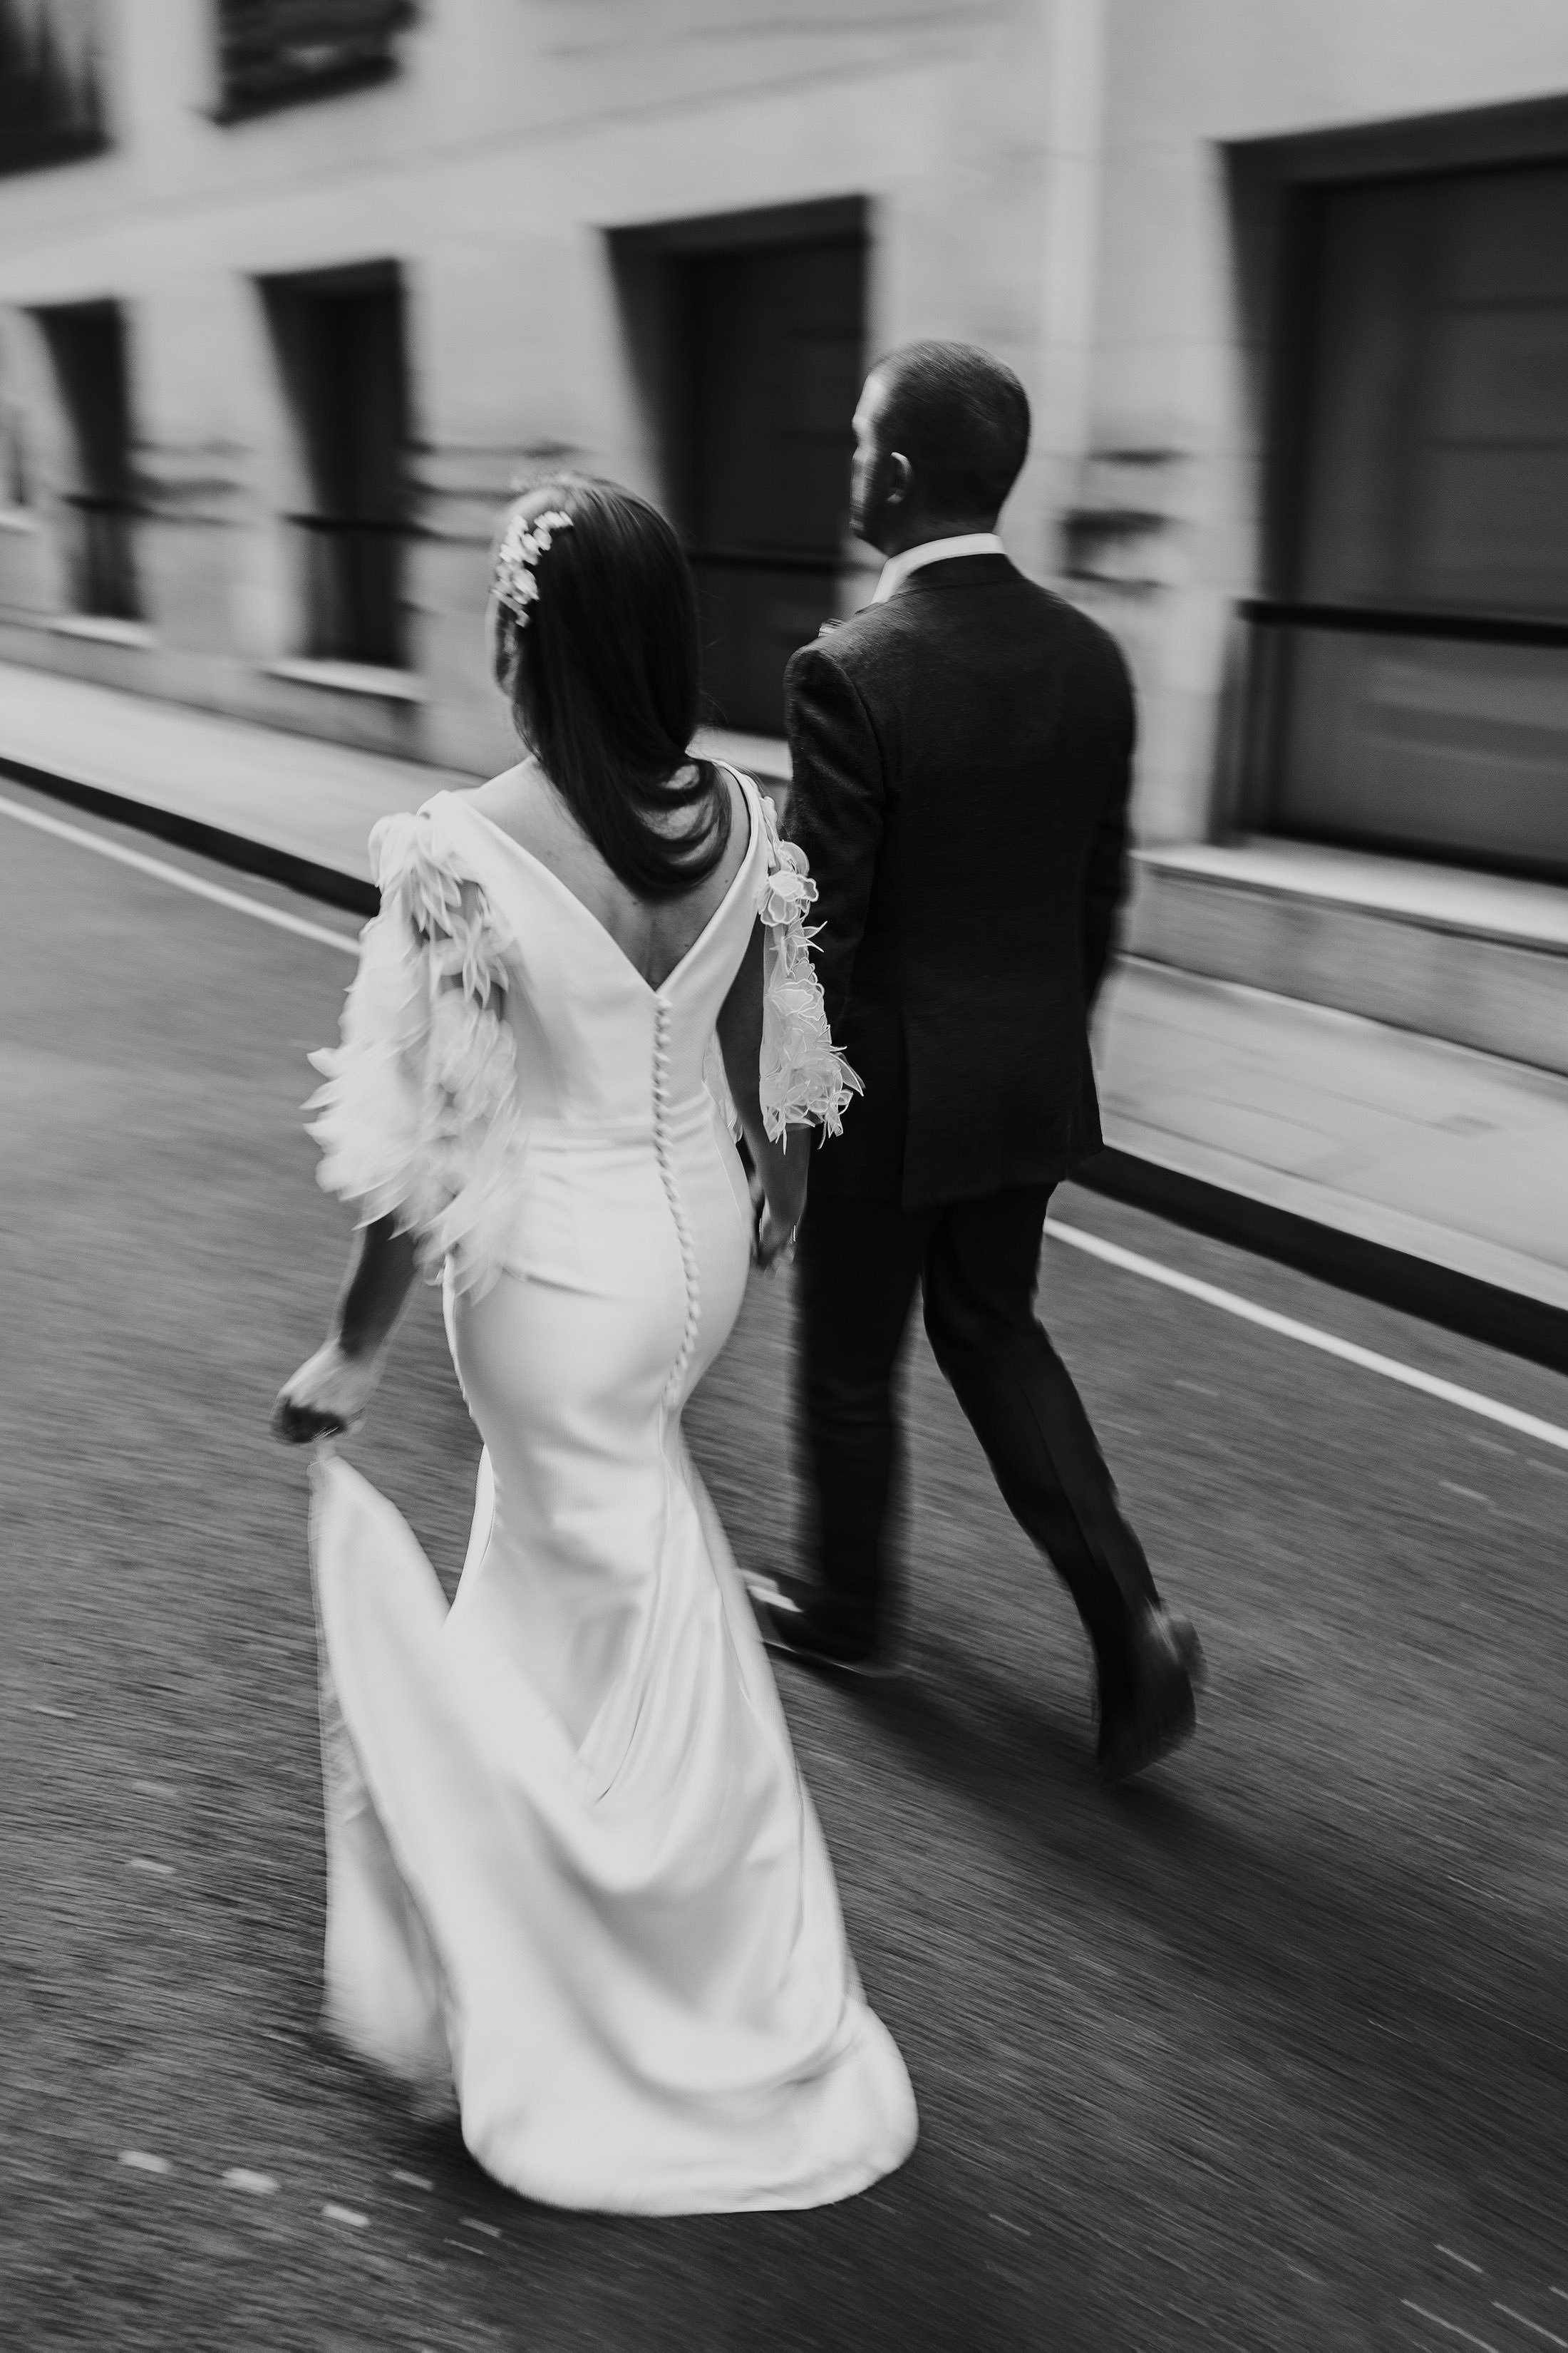 bride in suzanne neville dress walking hand in hand with groom